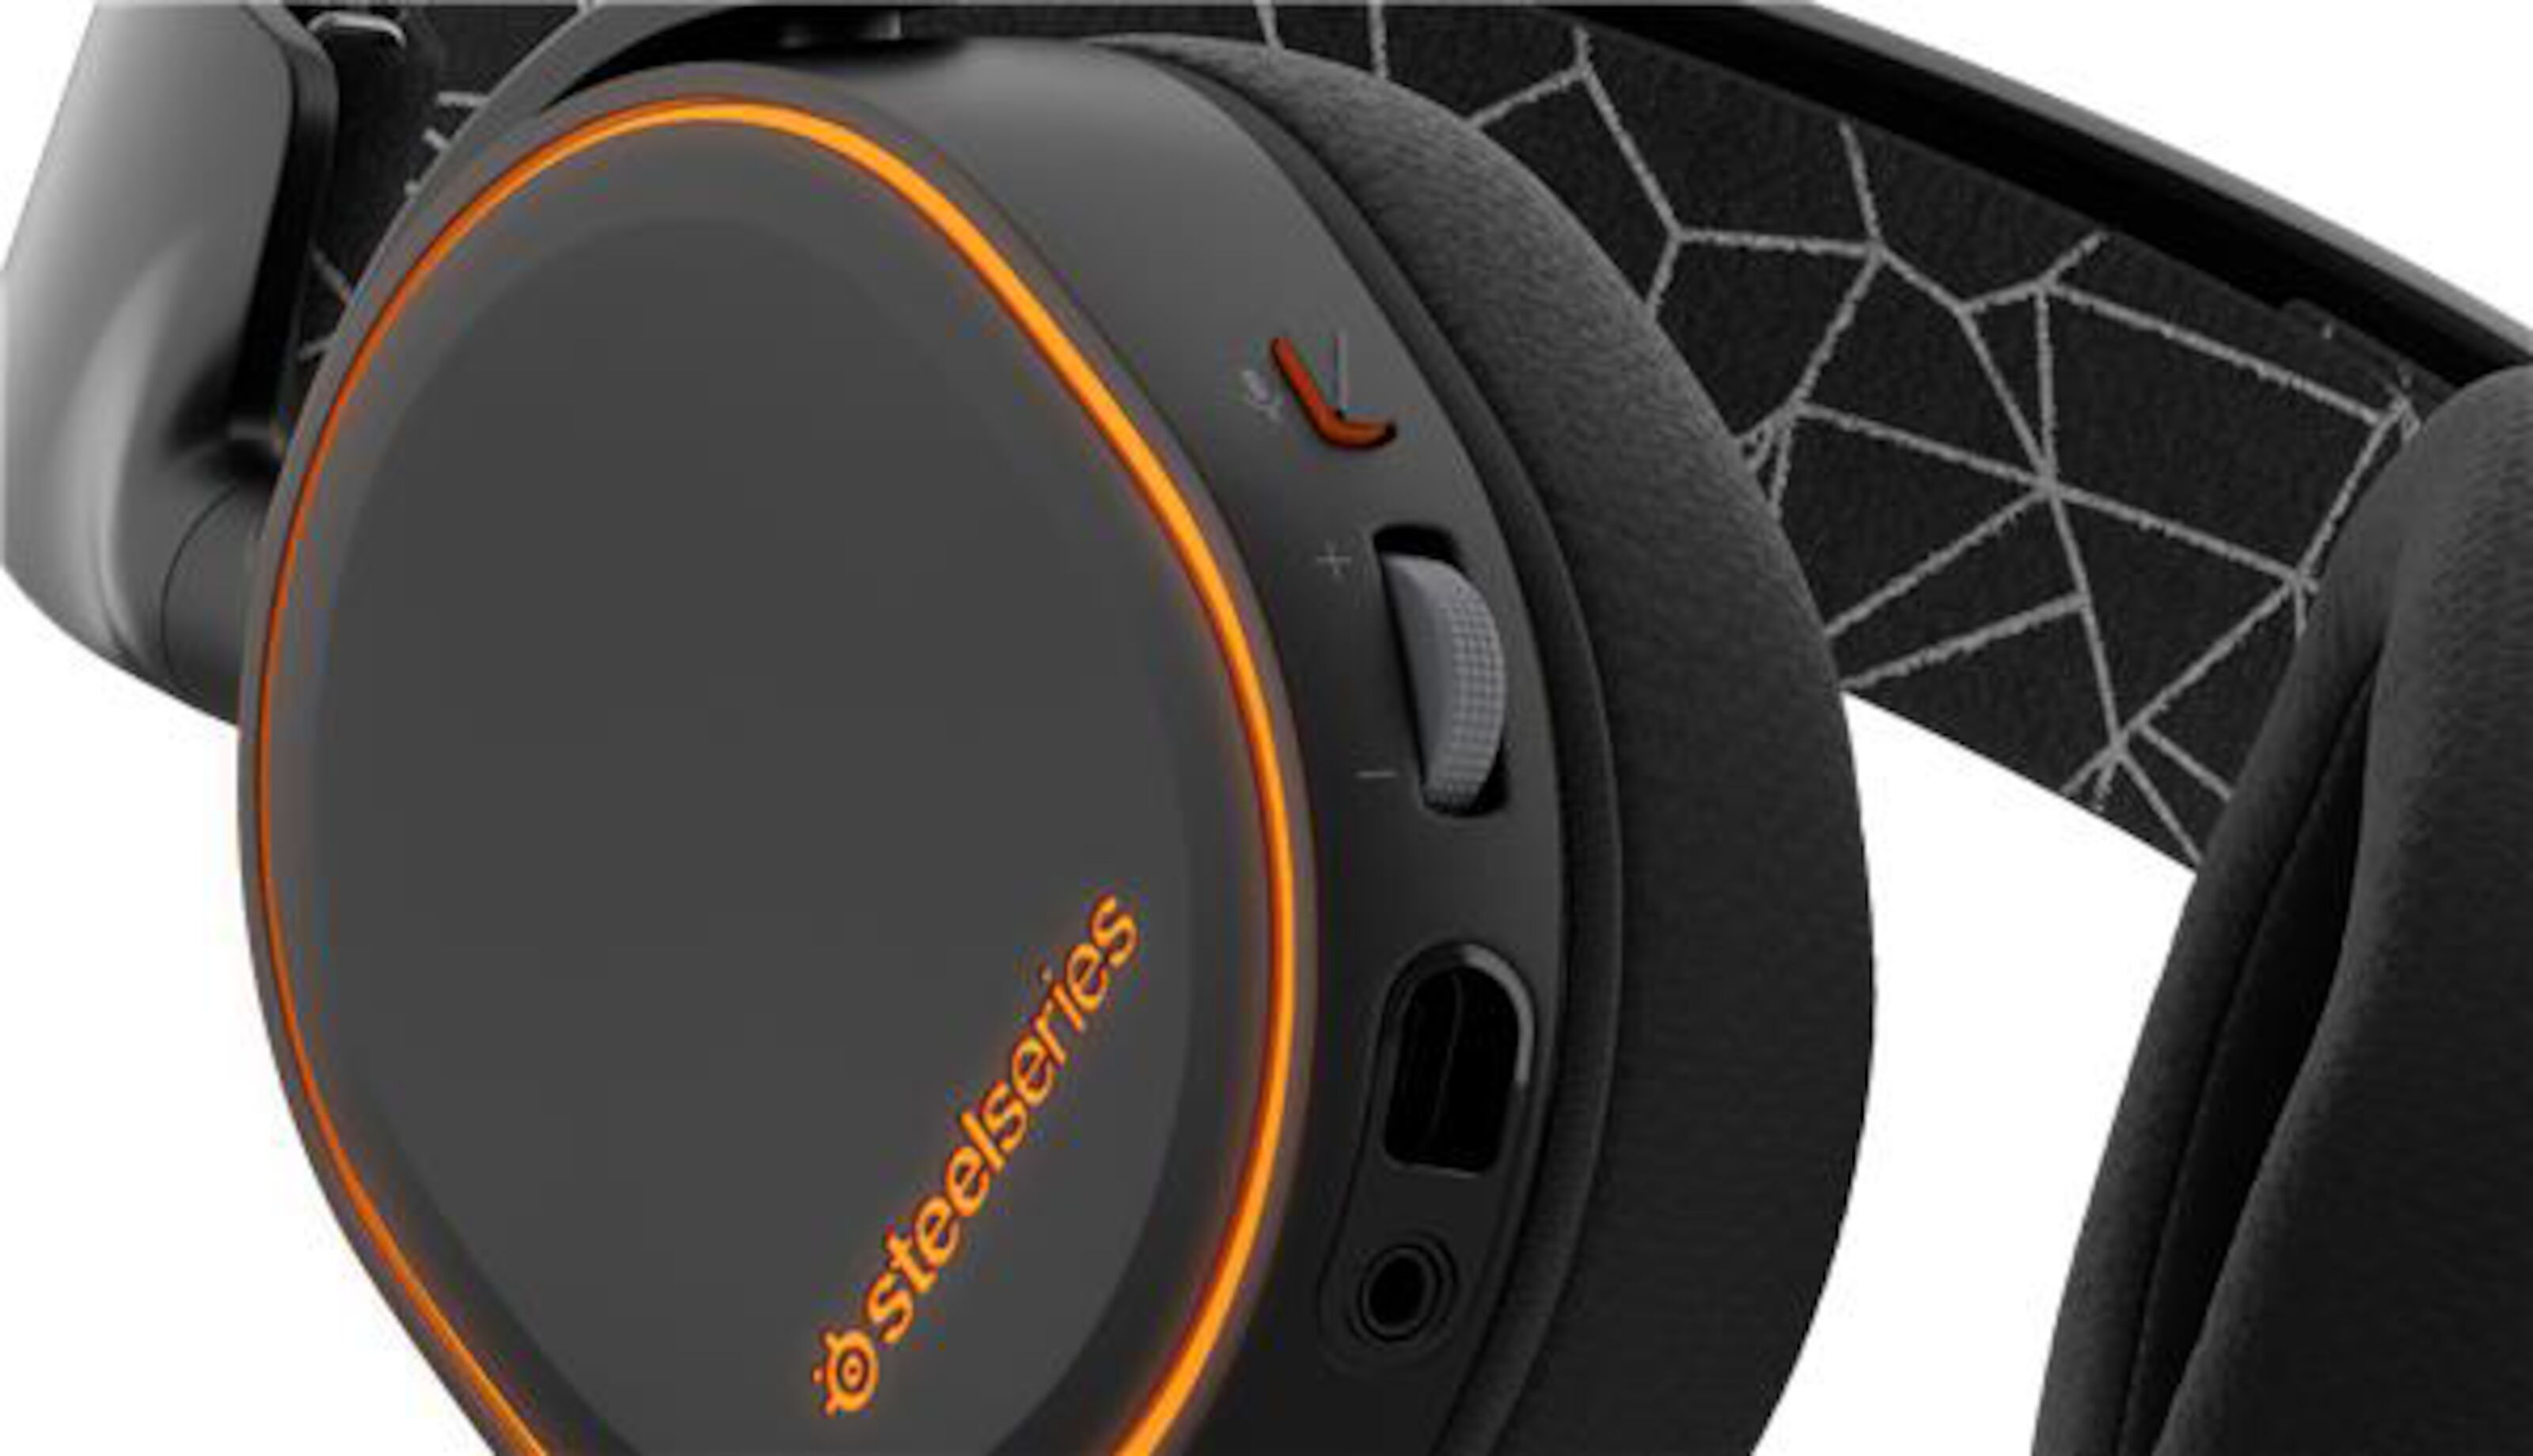 steelseries arctis 5 gaming headset 2019 edition review